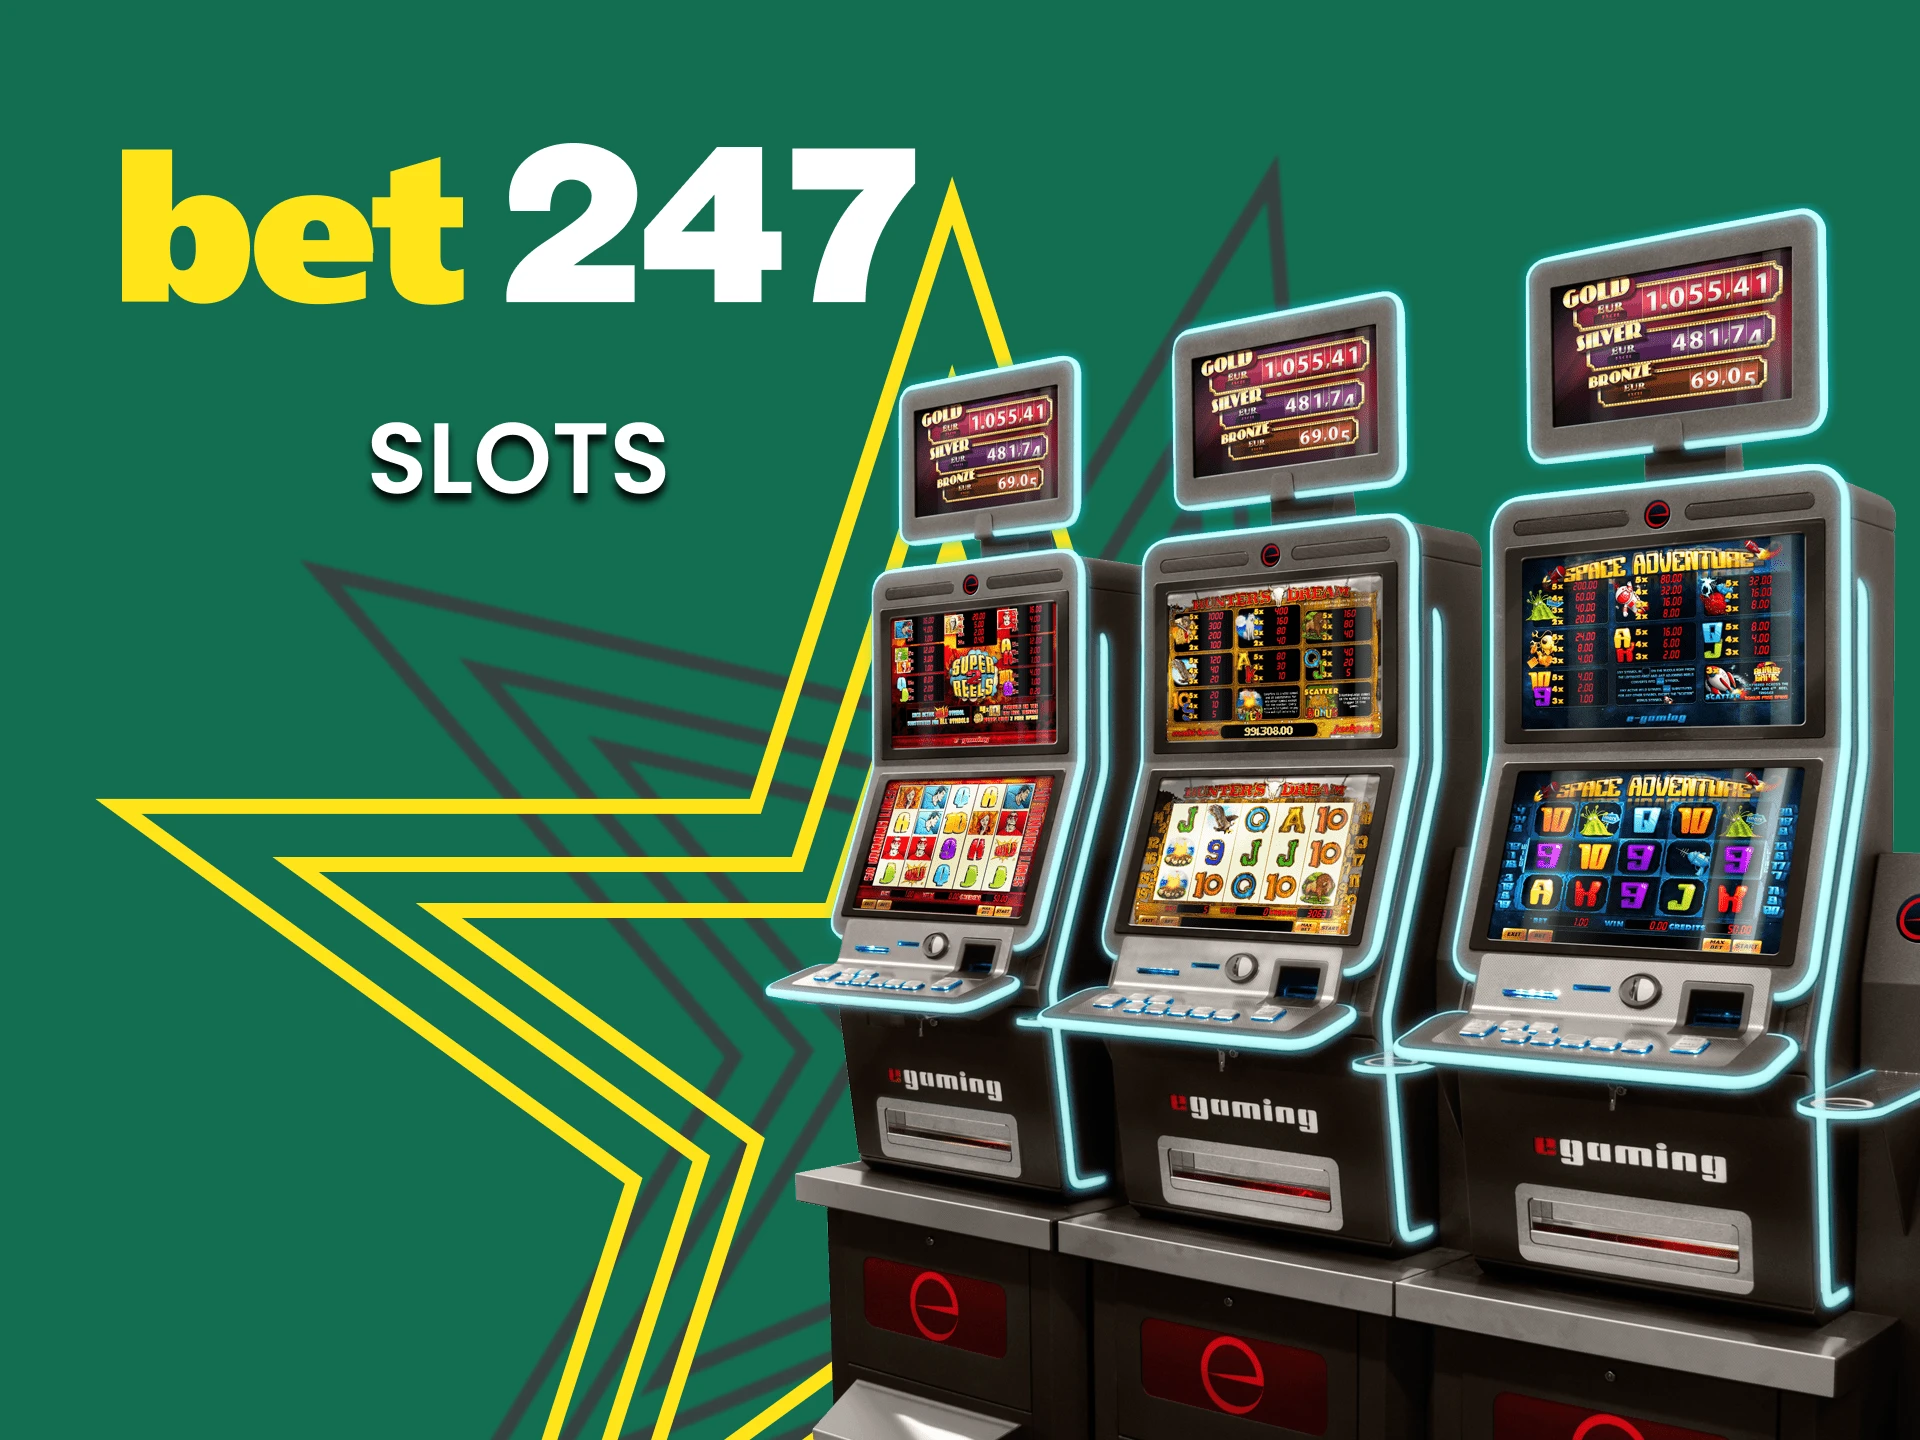 At Bet247 bet on slots machines.